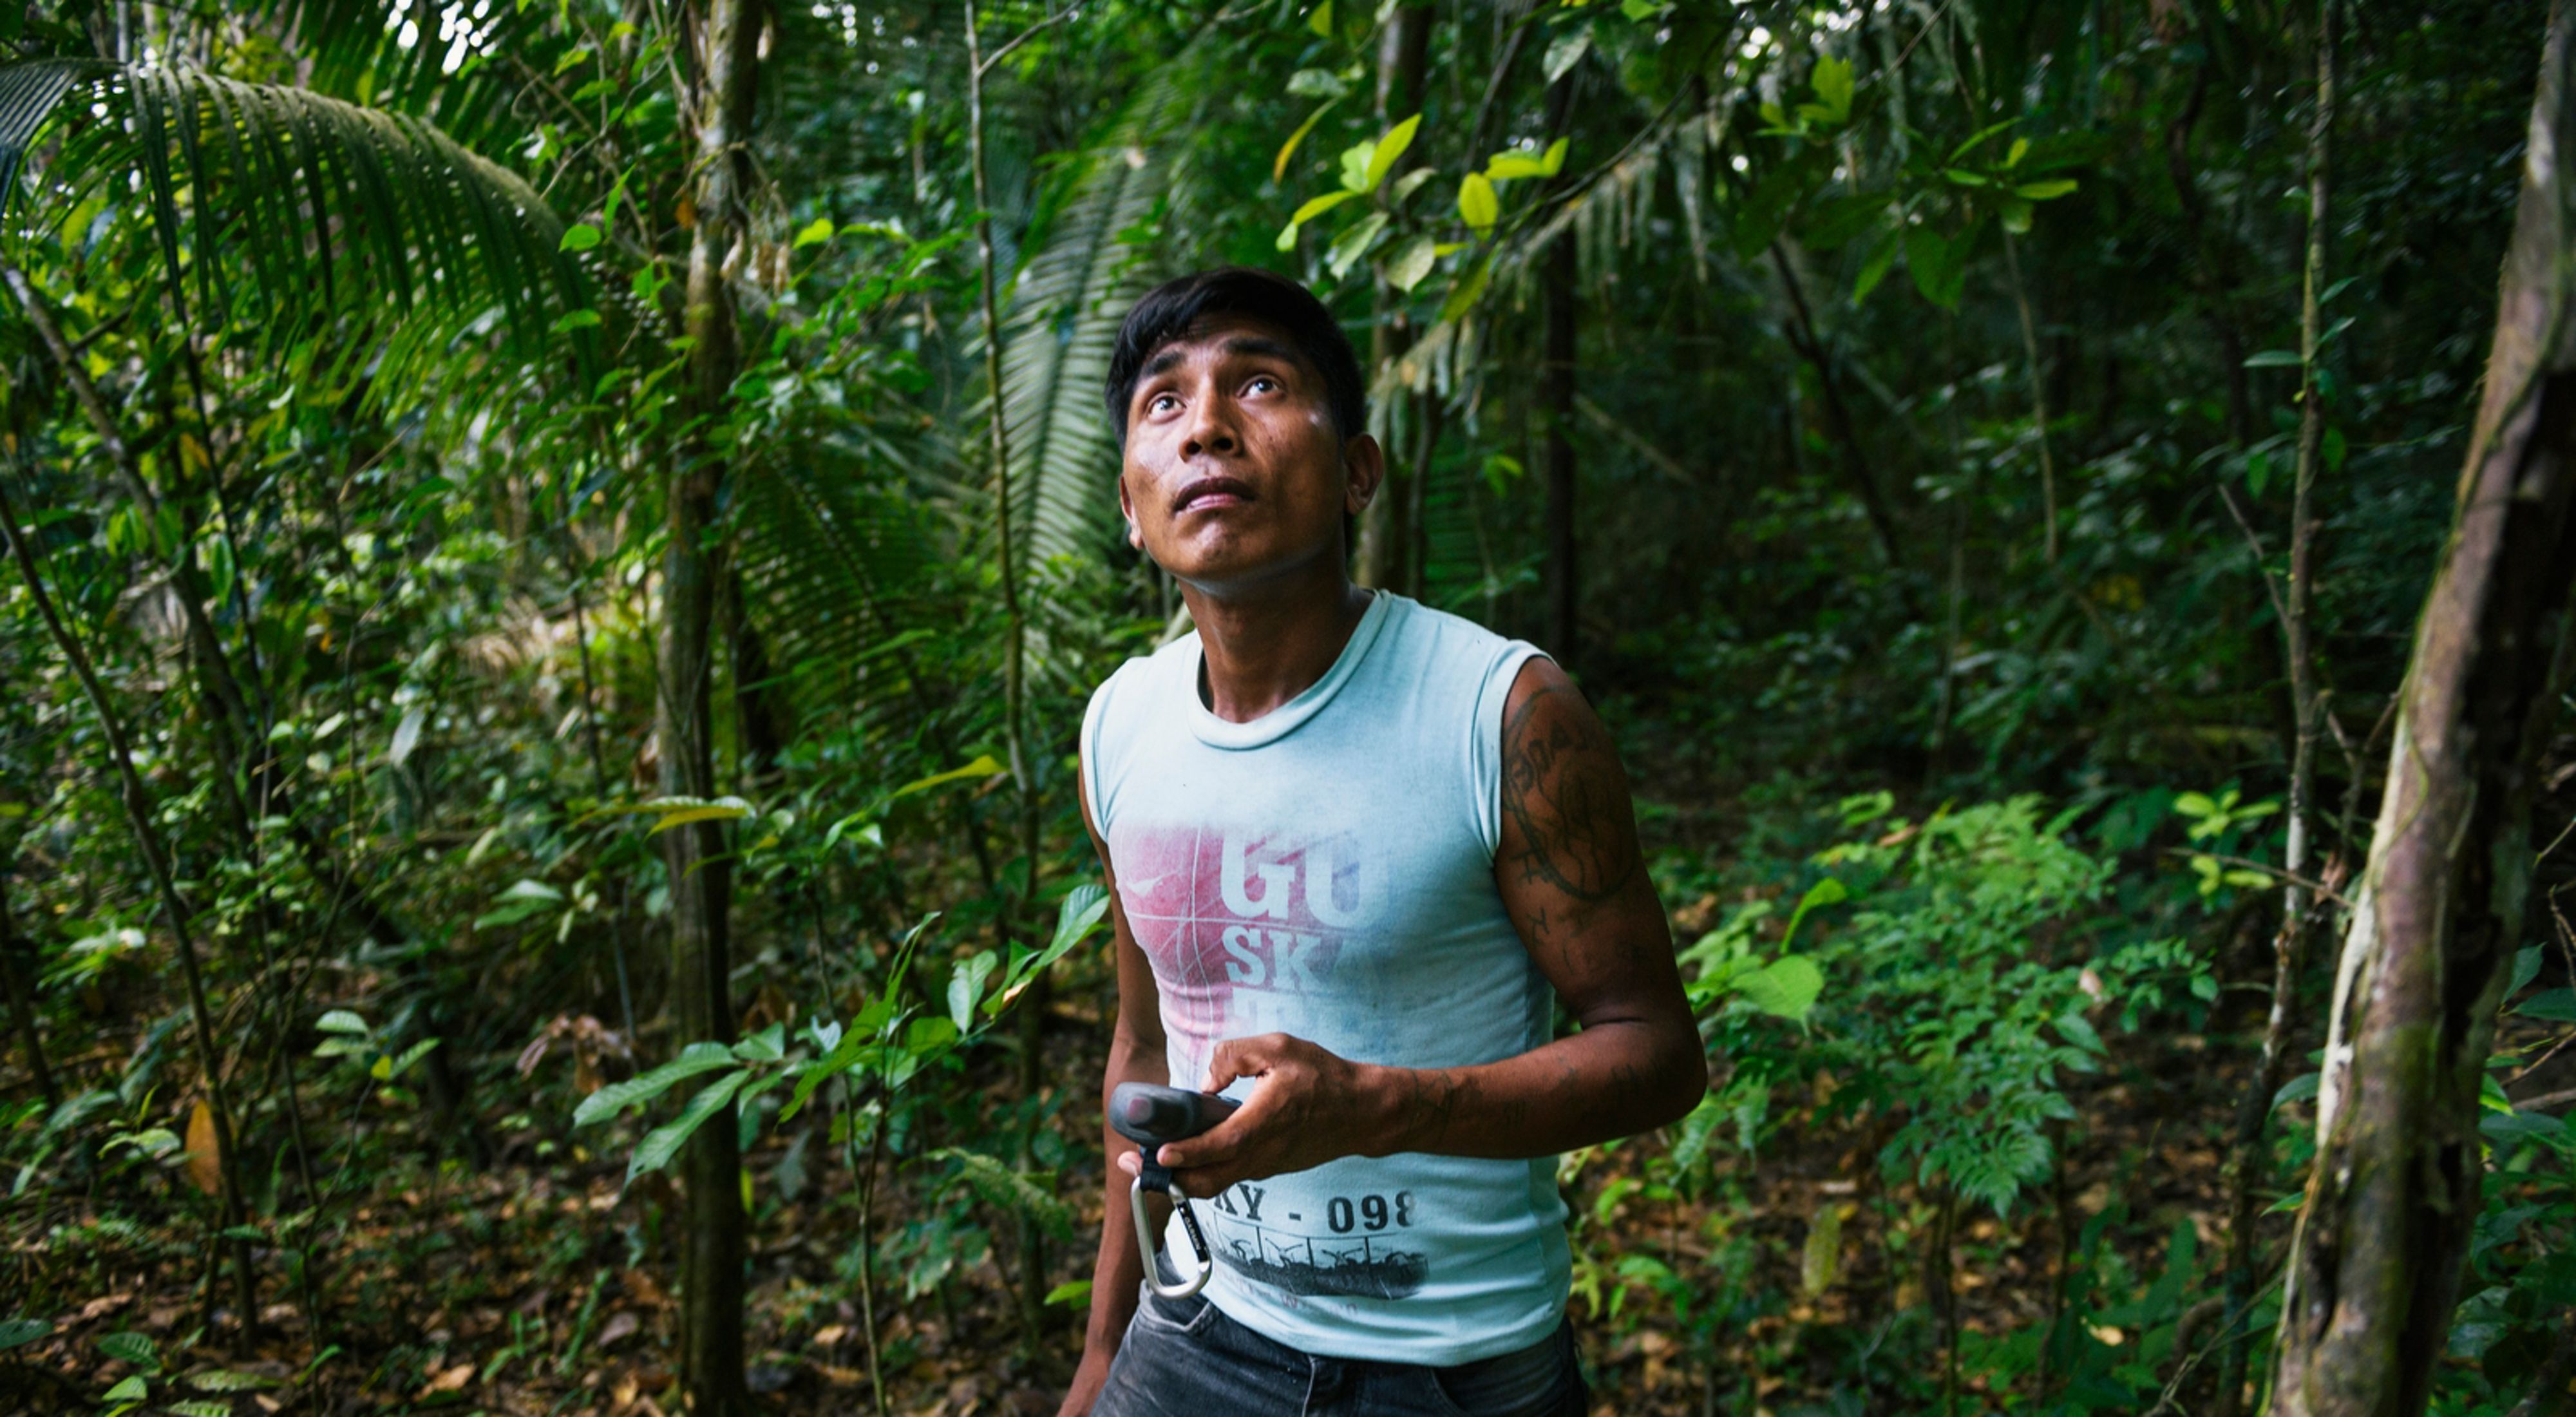 Bepnhibety Xikrin surveying restoration efforts in a forest near the Pot-Kro Village, Brazil. He marks the location of Brazil nut trees in his GPS.  This work is part of the Conservancy and community's ethnomapping effort to identify and preserve areas of the forest that are especially important to the community. Our innovation is enabling compliance with Brazil’s progressive Forest Code, while increasing economic opportunity. We are working with indigenous peoples to integrate traditional knowledge with modern approaches to landscape planning in order to enable greater leadership in deciding how their traditional territories will be managed and to have a stronger voice in policy decisions. 